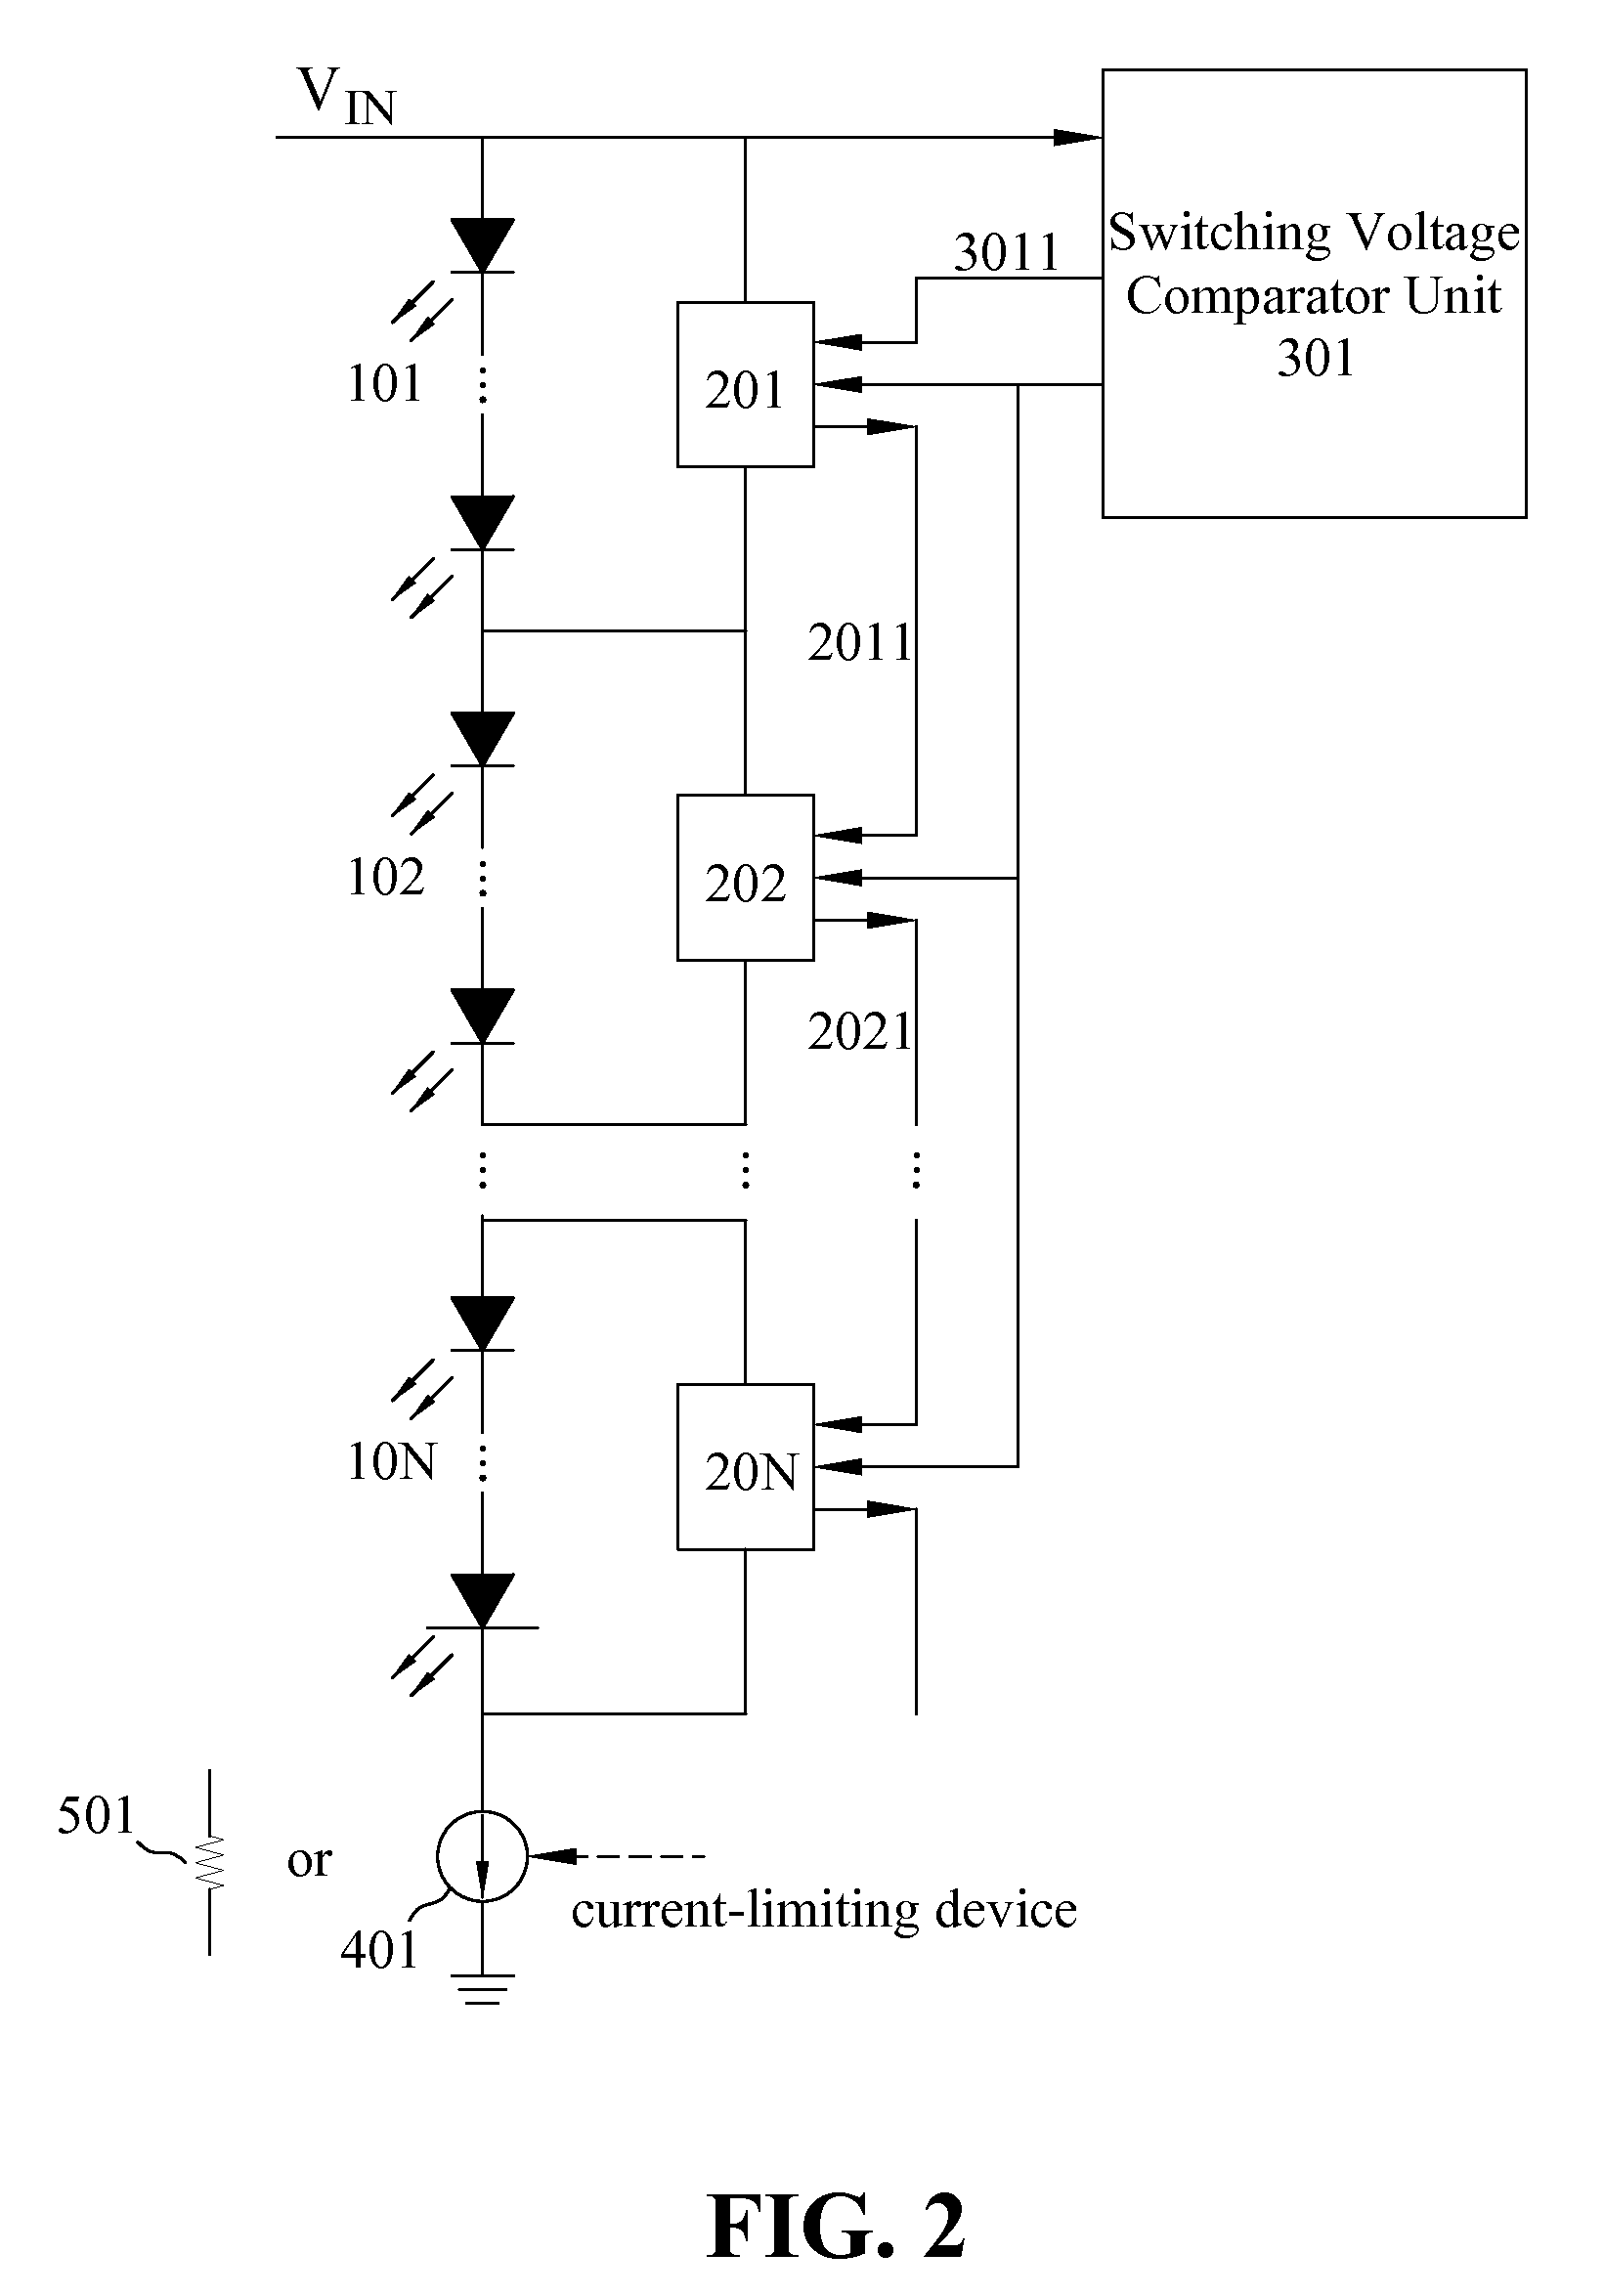 Apparatus for driving a plurality of segments of LED-based lighting units